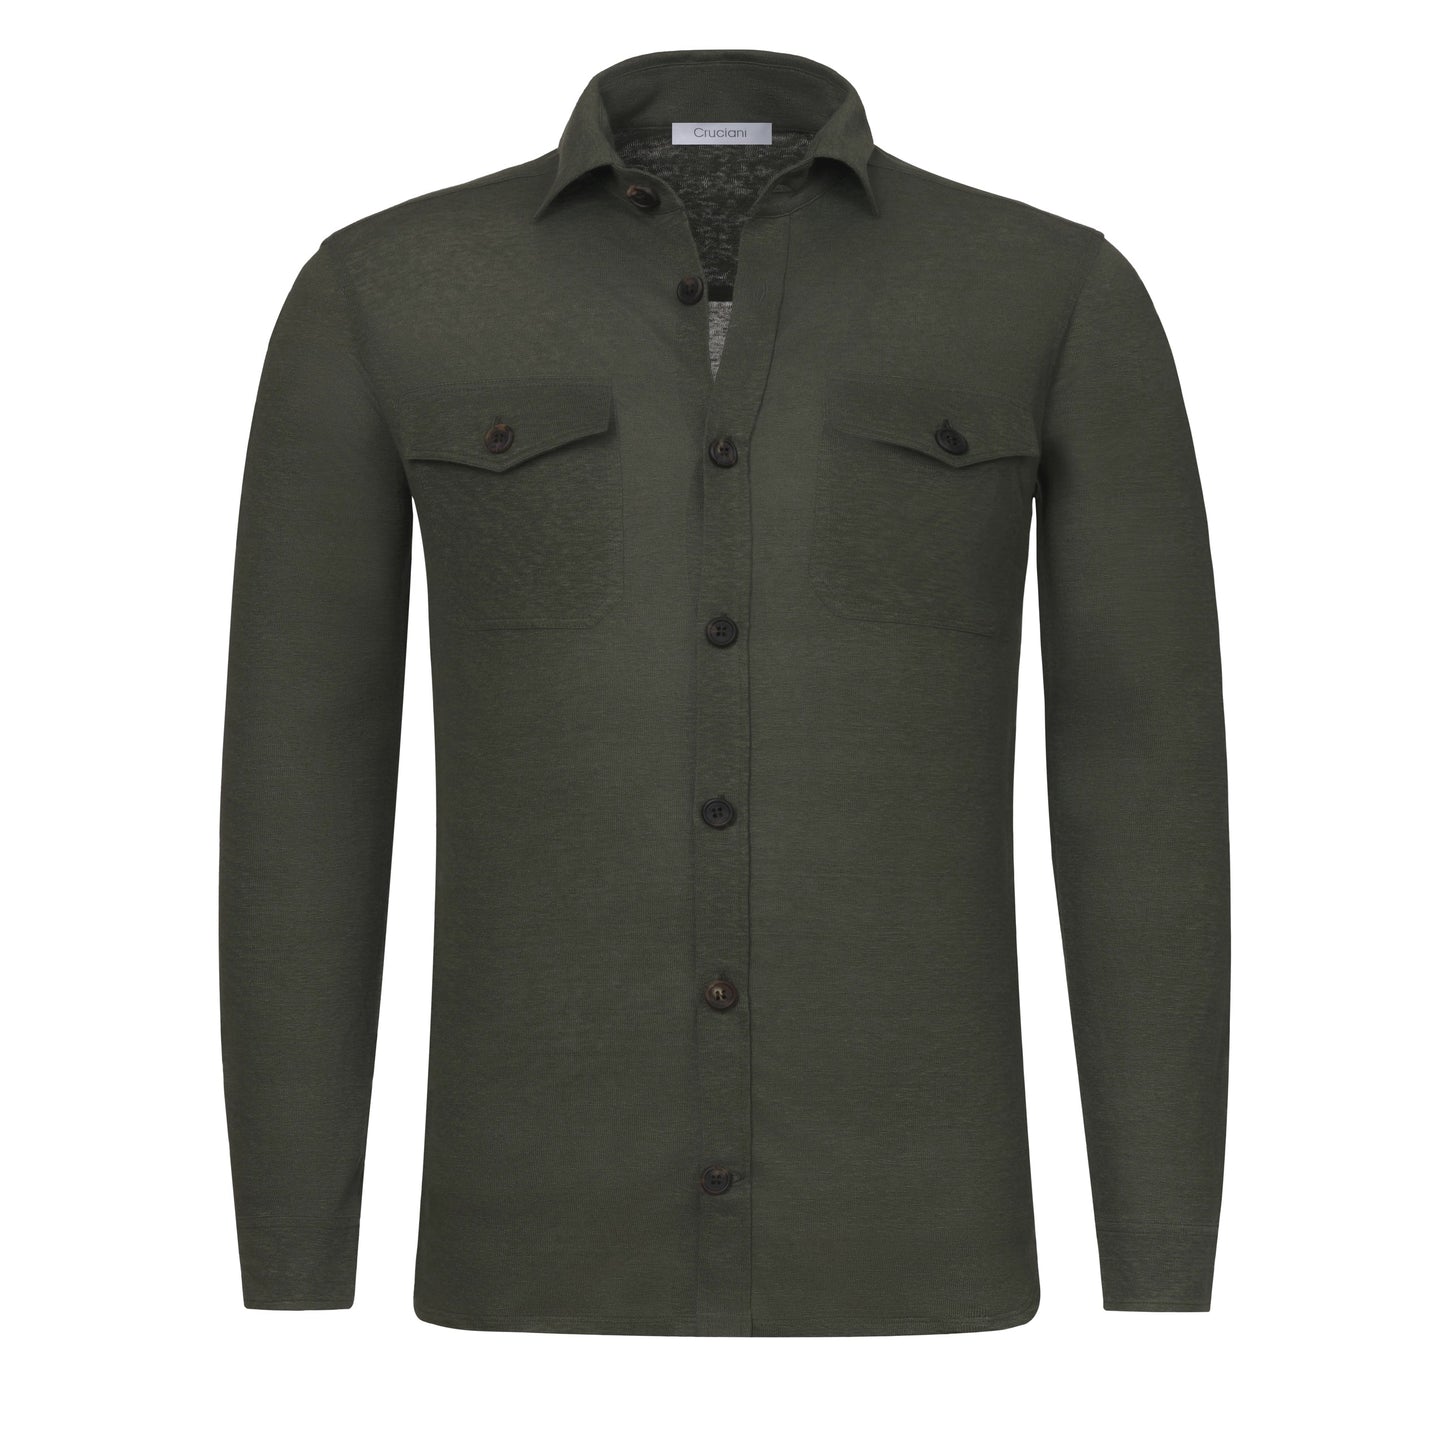 Cruciani Cotton Shirt with Patch Pockets in Green Melange - SARTALE